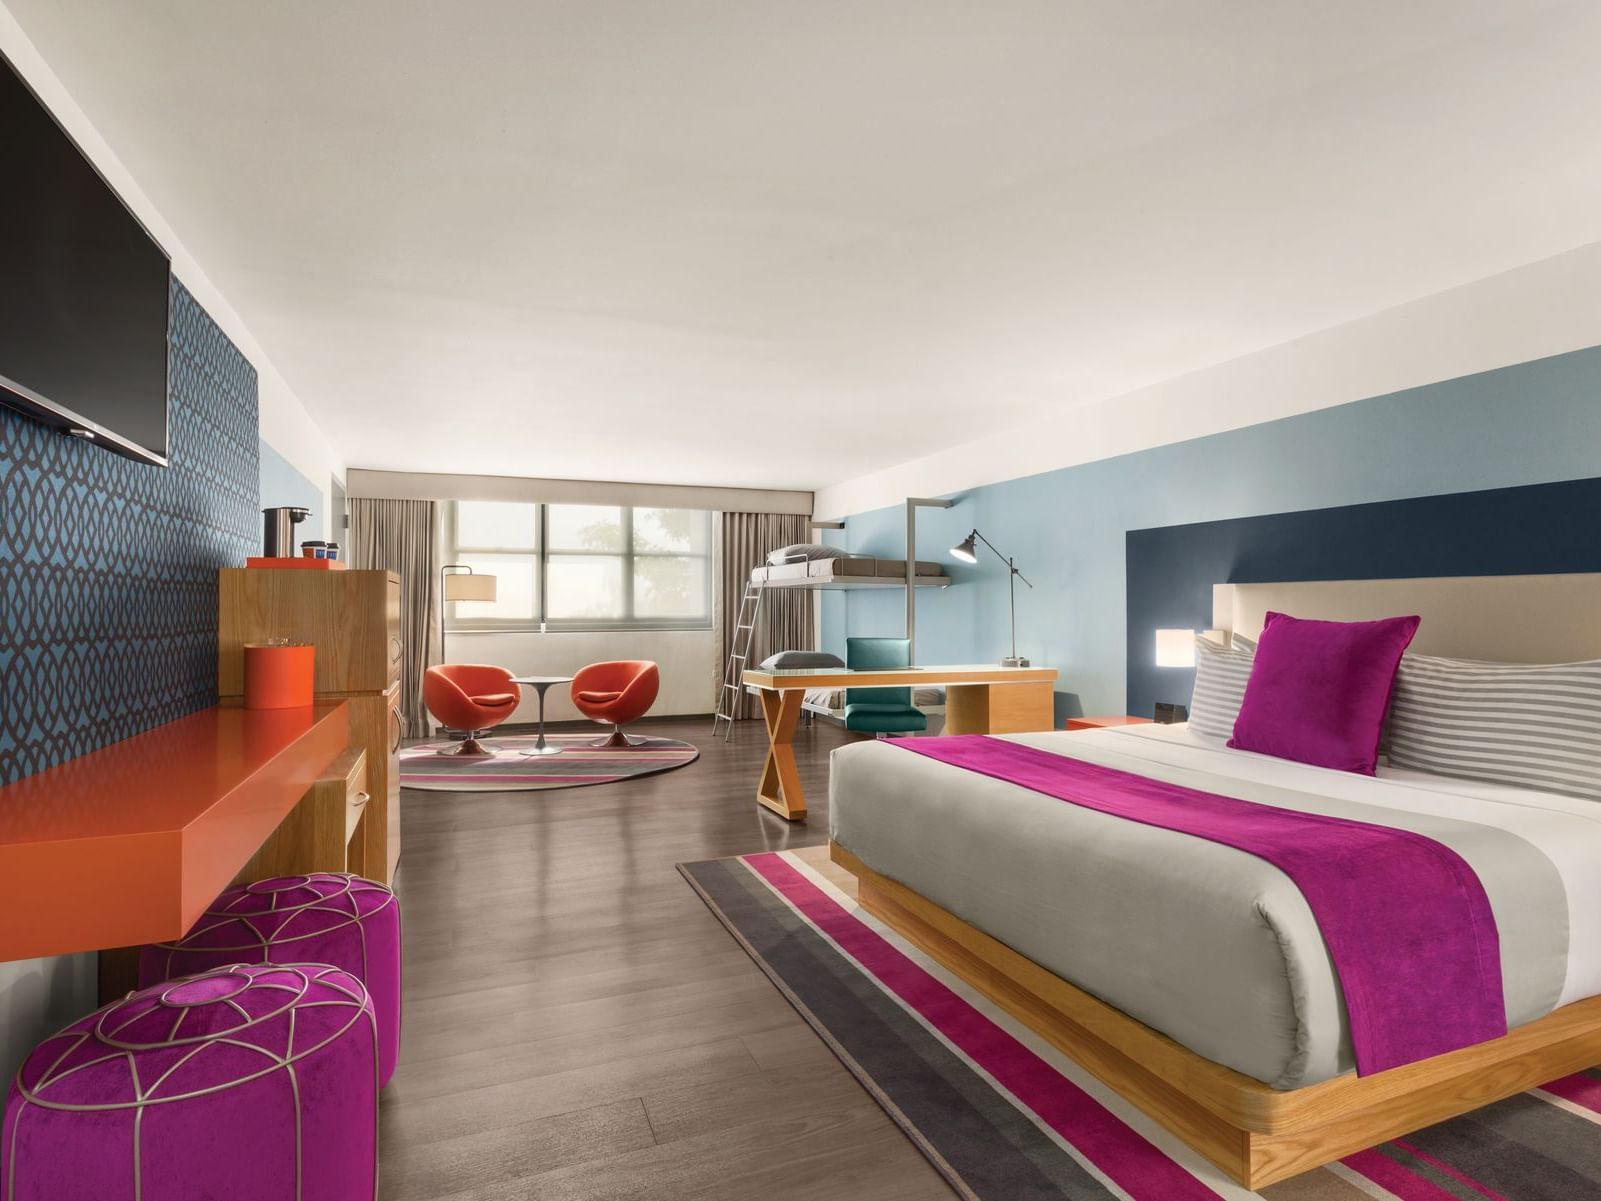 TRYP by Wyndham Isla Verde hotel room with kind bed, bunk beds and desk